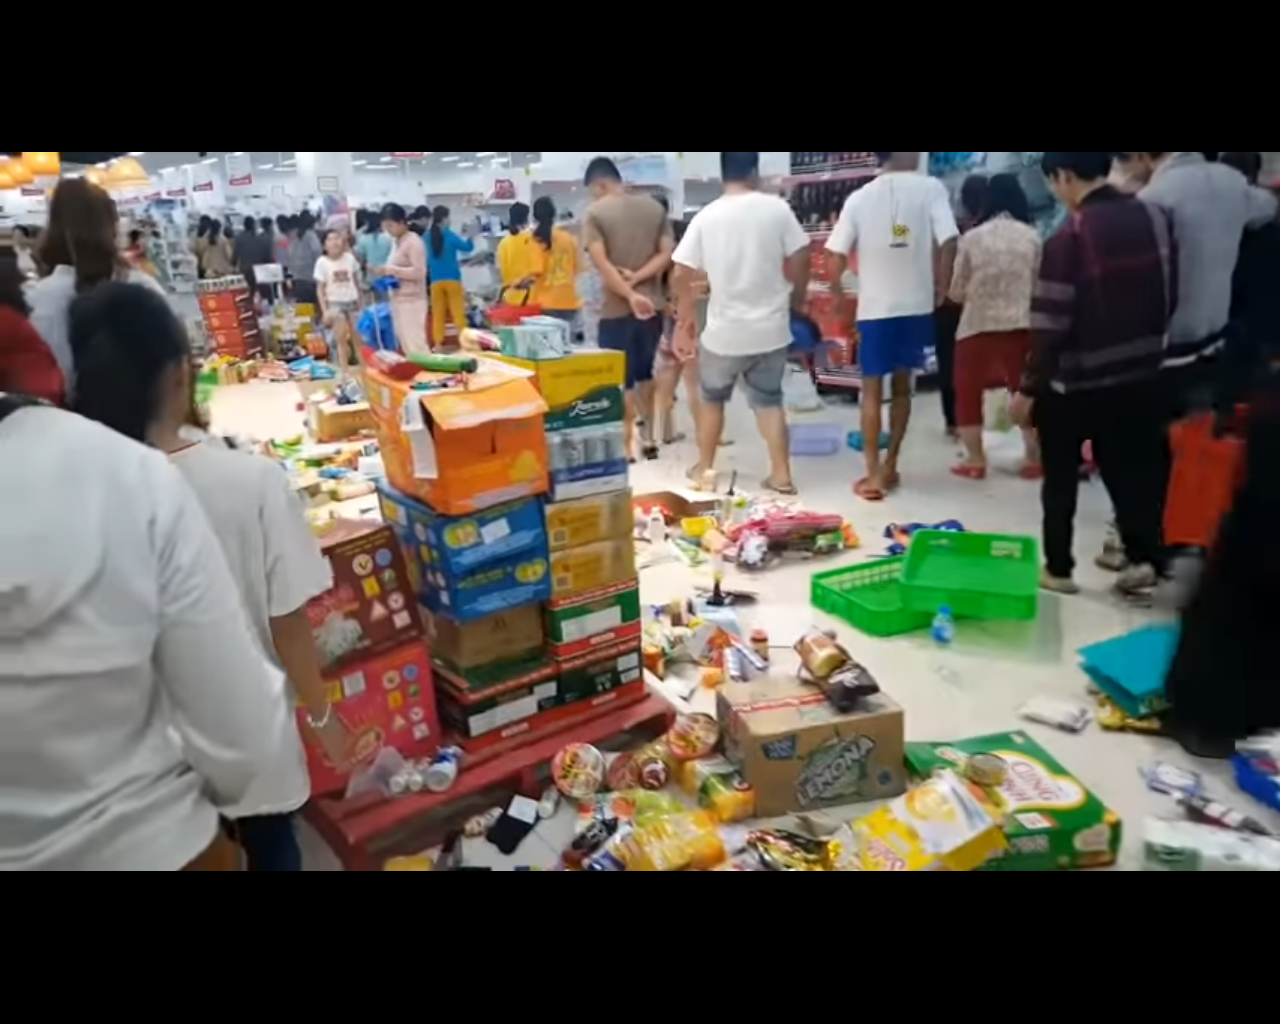 Goods are left on the floor at an Auchan supermarket in the southern province of Tay Ninh on May 21, 2019 in this screenshot.